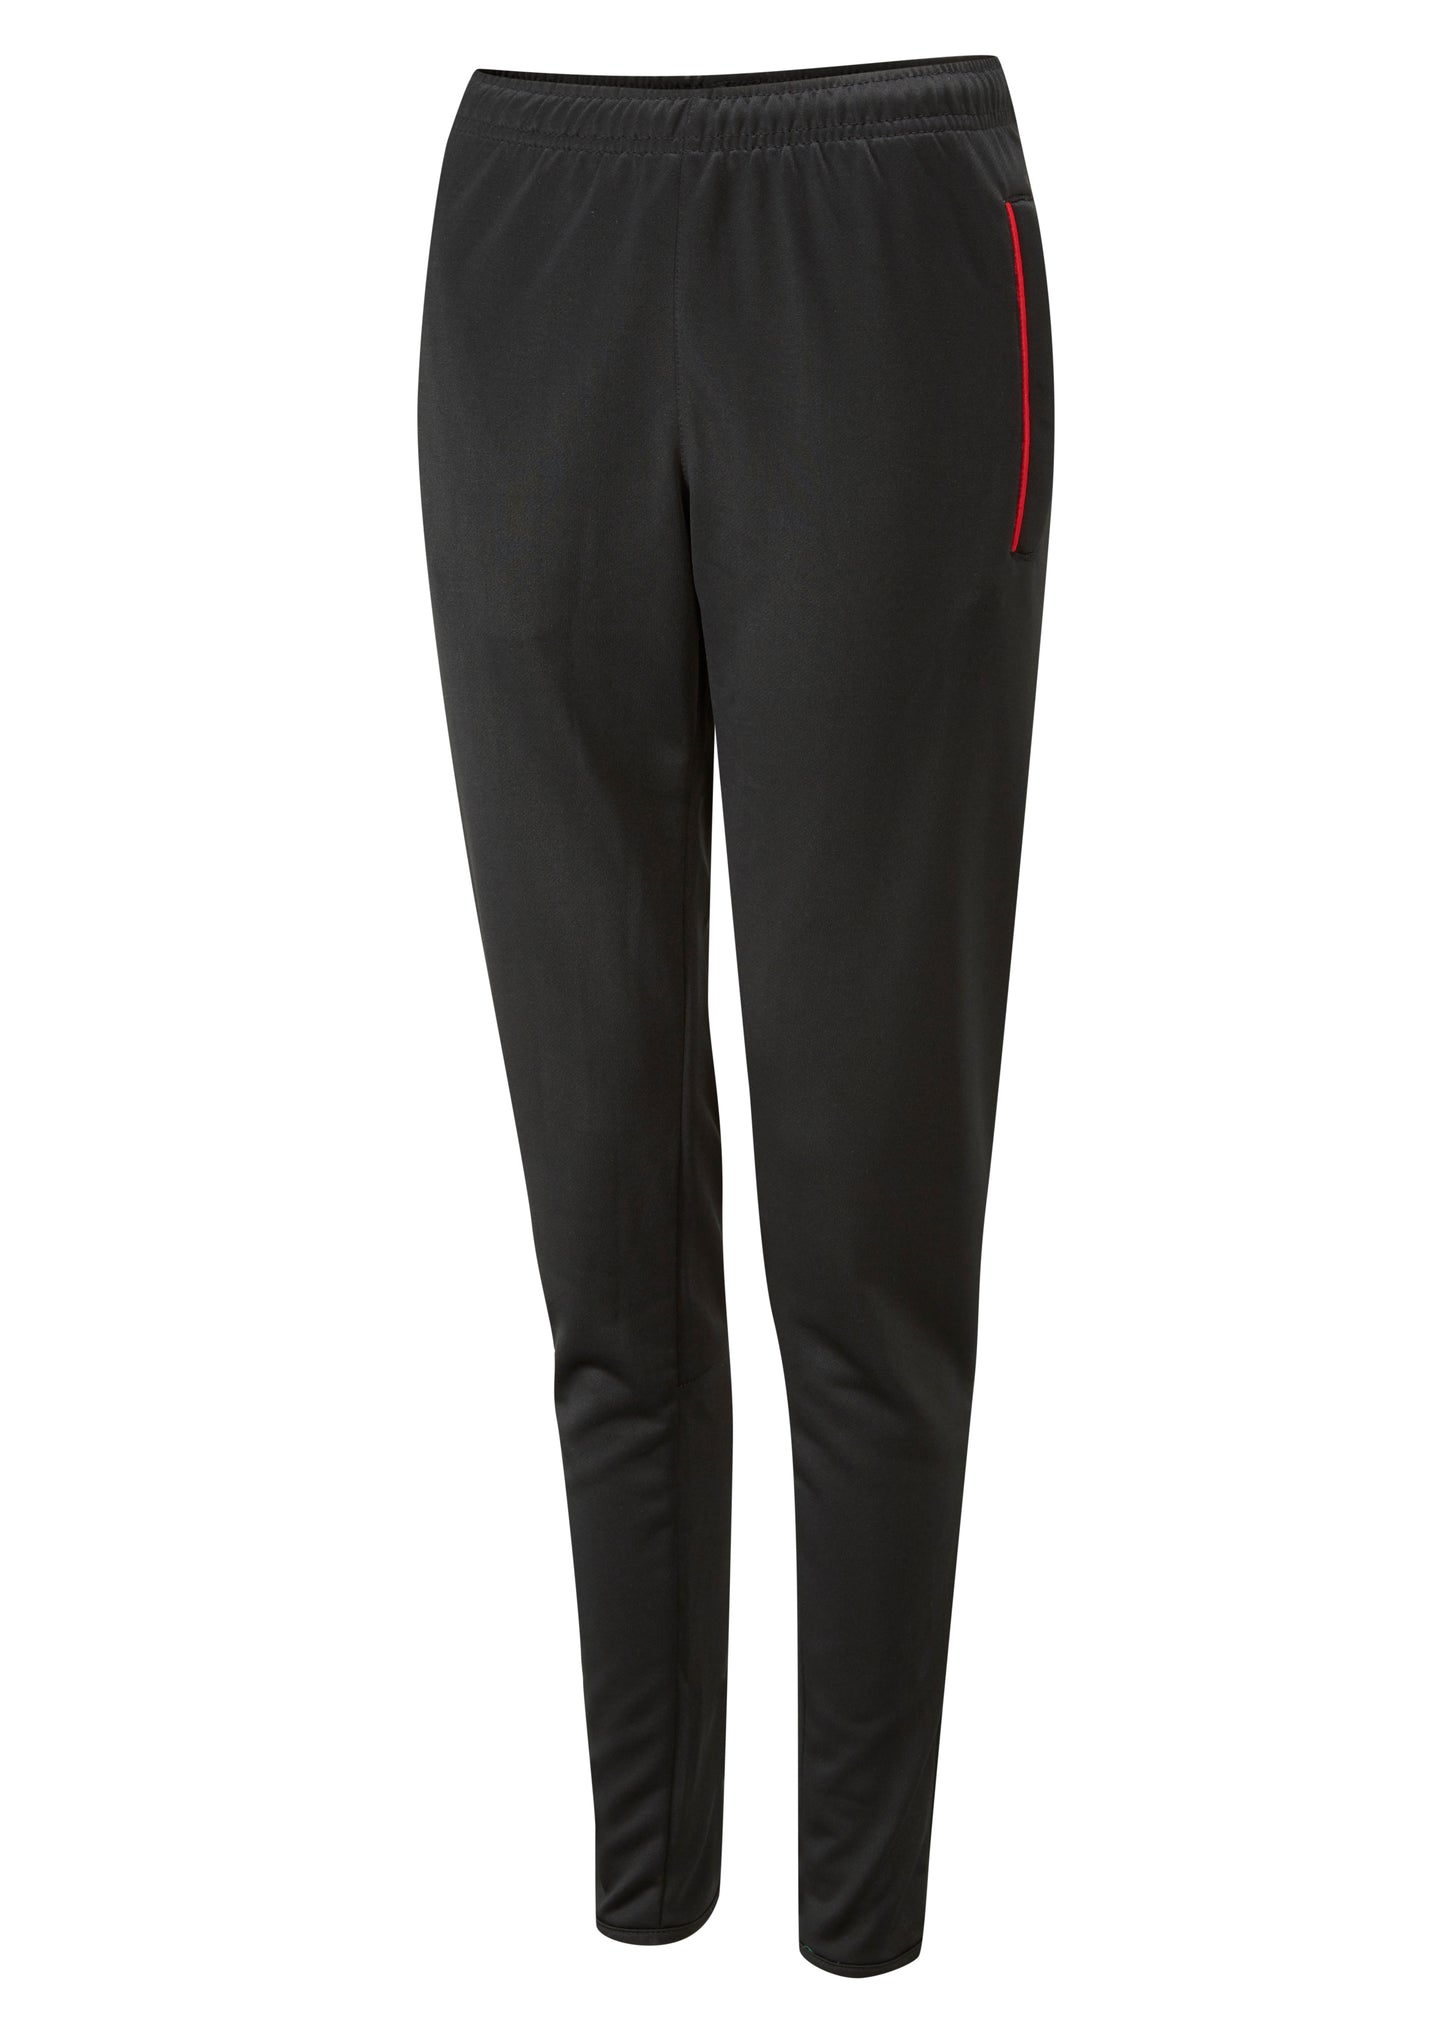 KES Black/Red Training Trousers